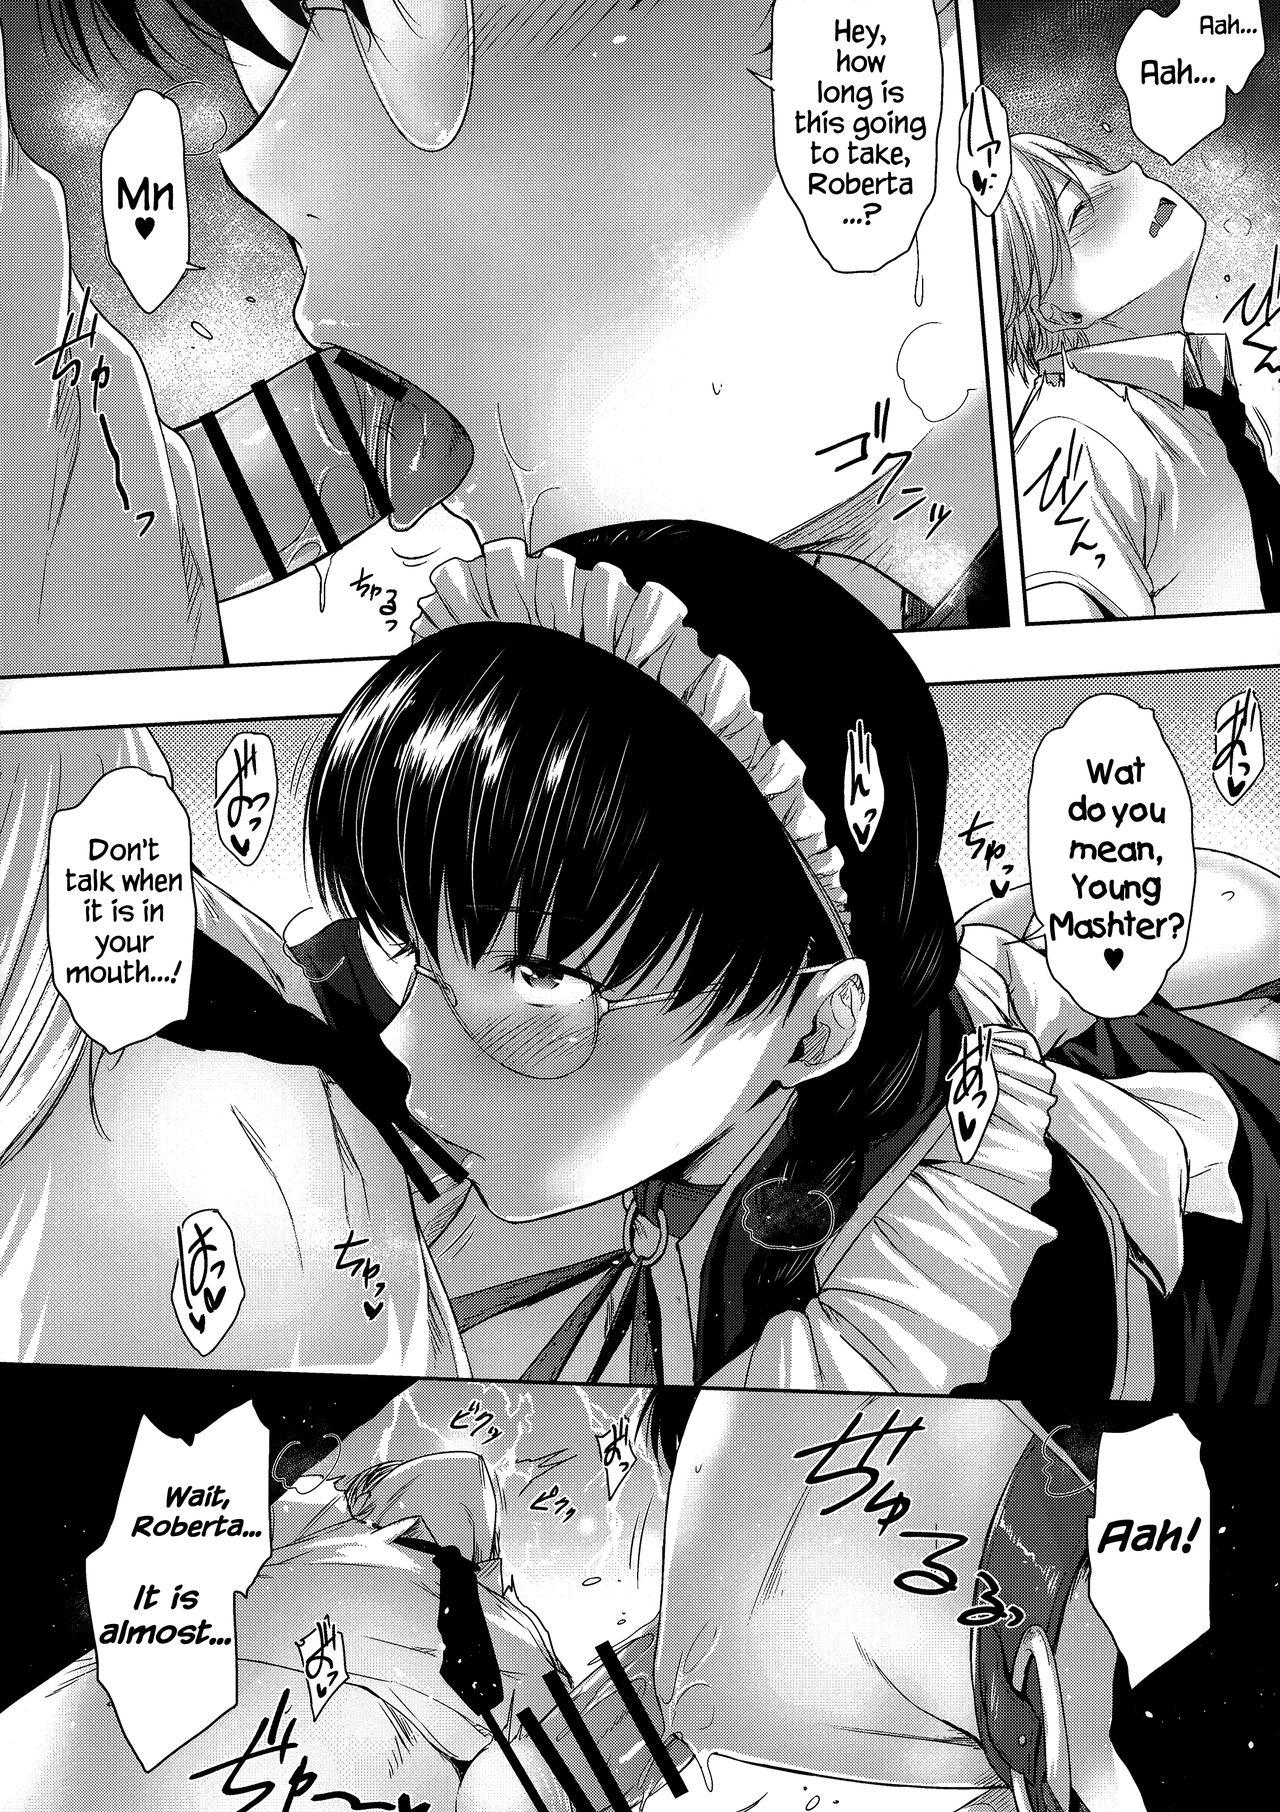 Awesome Maid no Tsutome | Bloodhound Dog Maid - Black lagoon Celebrities - Page 8